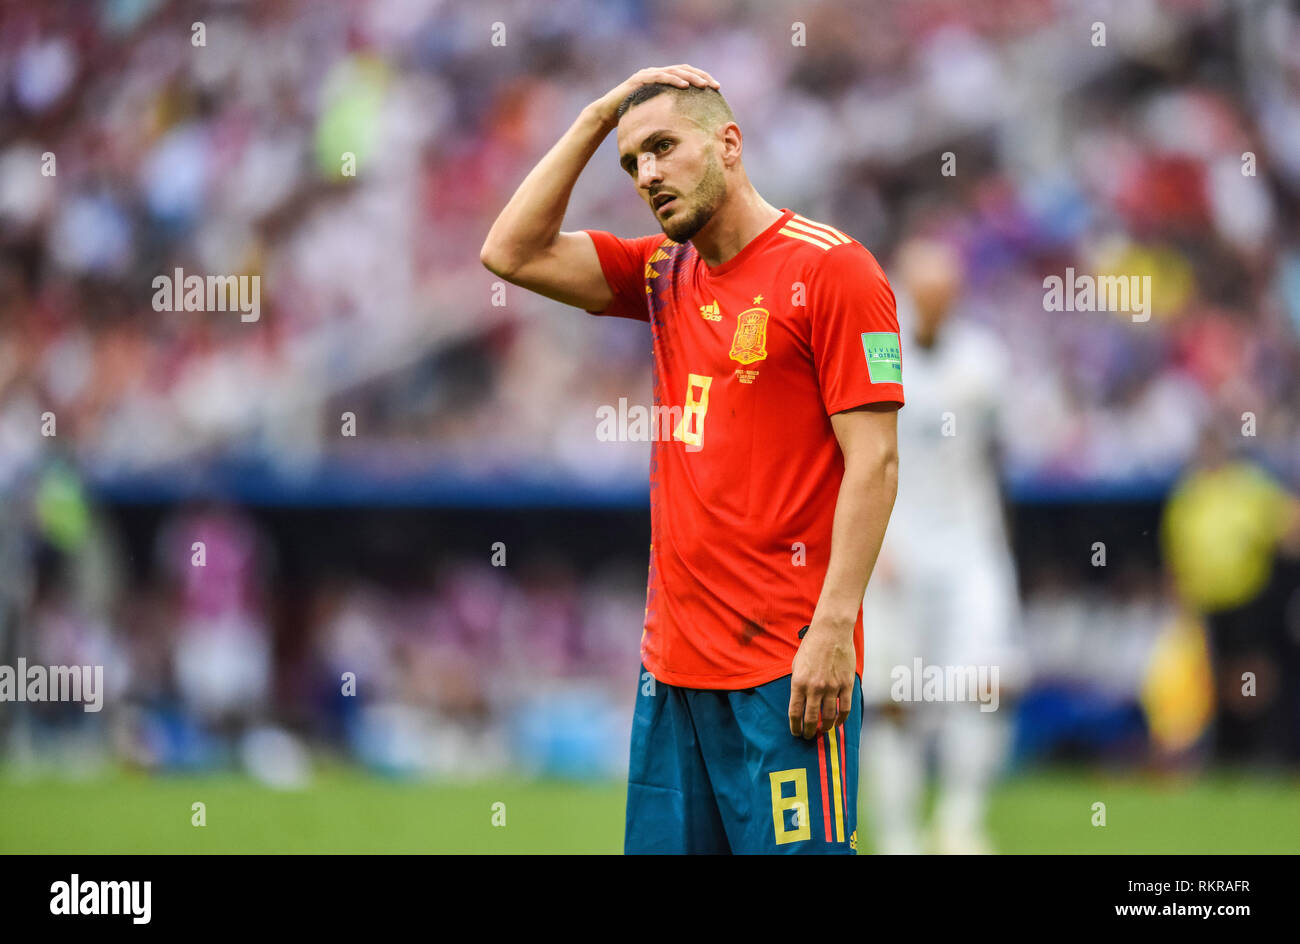 Moscow, Russia - July 1, 2018. Spain national football team midfielder Koke during FIFA World Cup 2018 Round of 16 match Spain vs Russia. Stock Photo